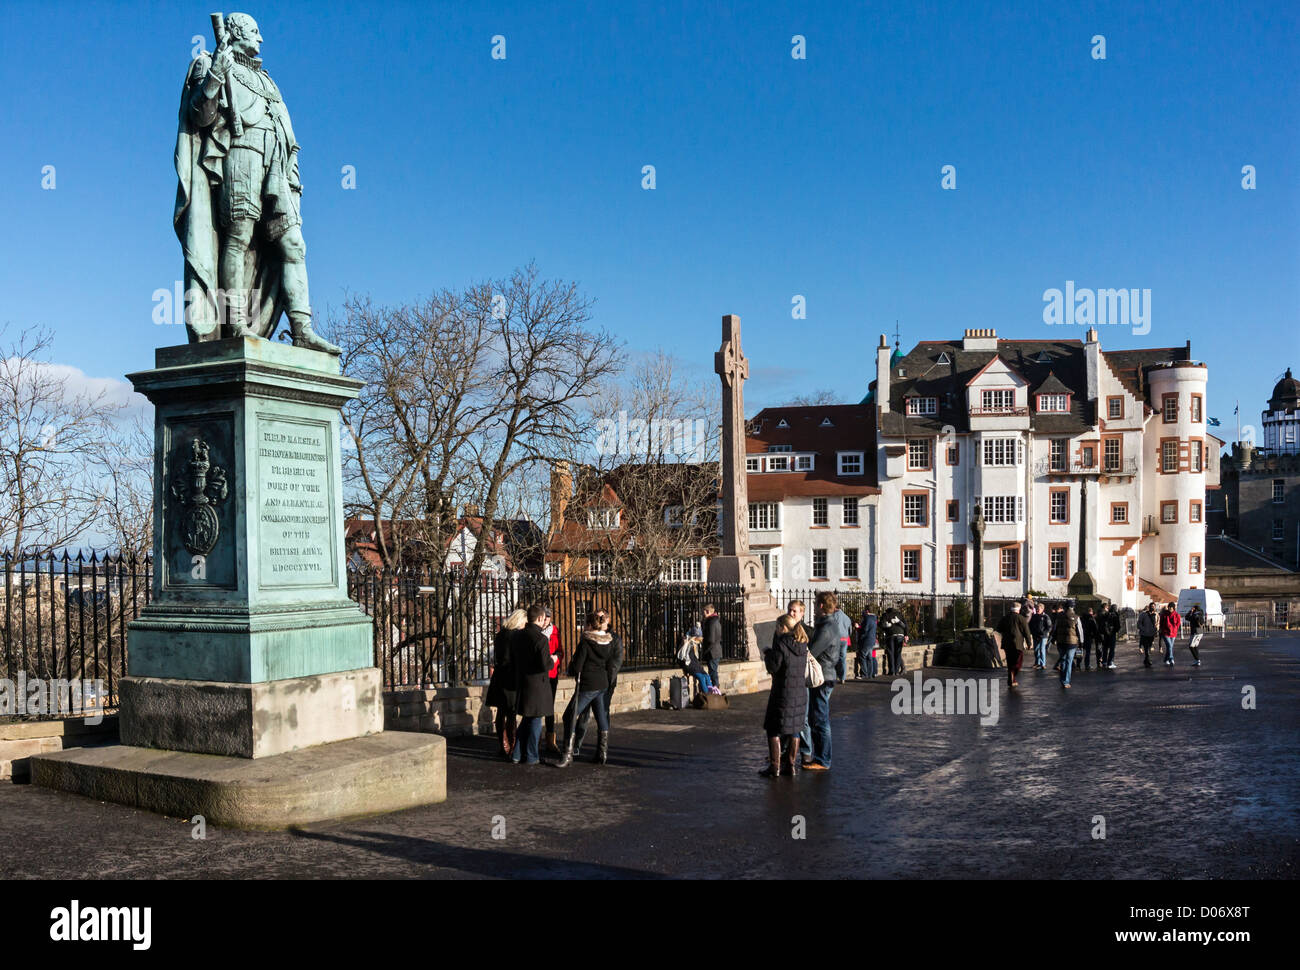 Statue of Field Marshal His Royal Highness Frederick The Duke of York and Albany K.G. located on the Edinburgh Castle Esplanade Stock Photo